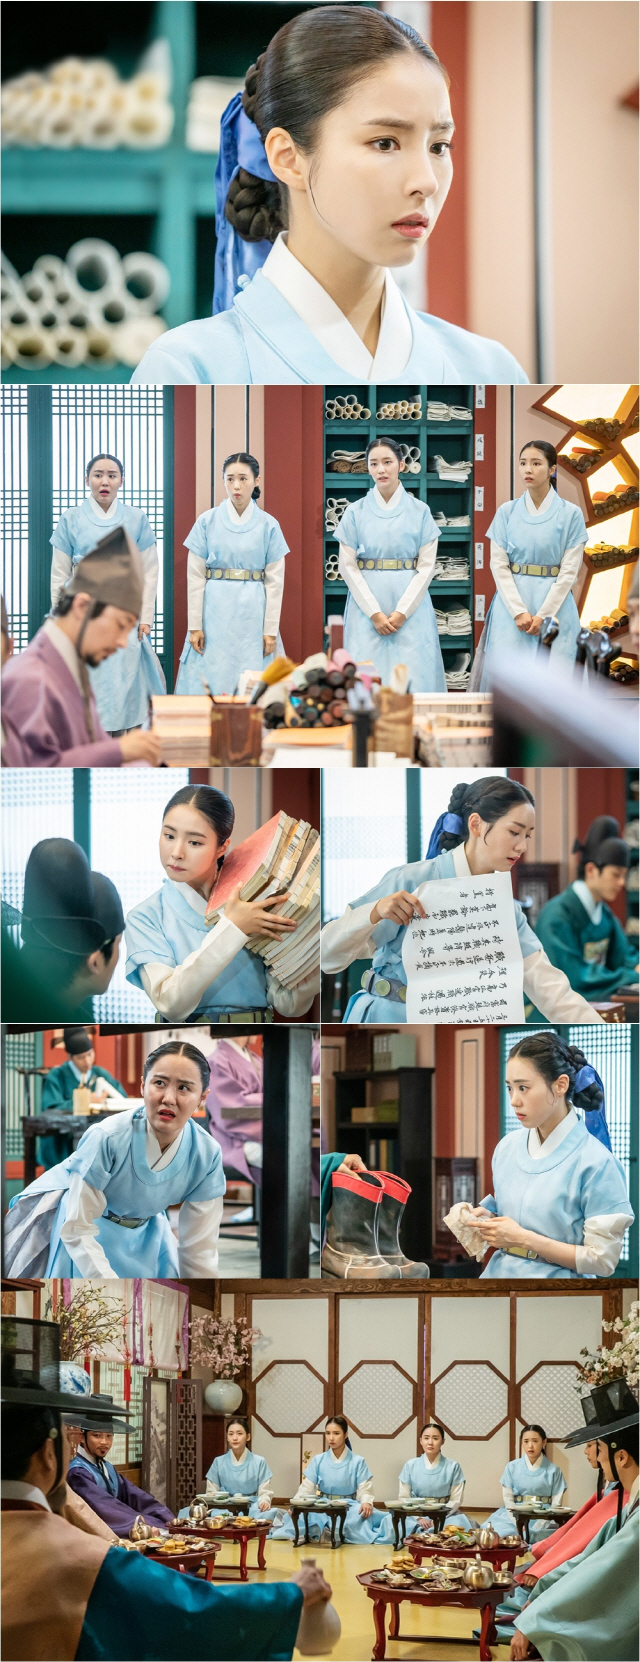 Shin Se-kyung, a new employee, will enter the hall as Ada Lovelace.It is the harshness of the senior officers who wait for her with a swollen heart.After completing all kinds of chores such as carrying heavy books, the appearance of Sun Shinrye amplifies her interest by guessing her palace Earth 2 which will not be able to wind well in the future.The MBC drama Na Hae-ryung released the first Ada Lovelace of Joseon, Na Hae-ryung (Shin Se-kyung), who entered the hall on the 24th.Na Hae-ryung, starring Shin Se-kyung, Jung Eun-woo, and Park Ki-woong, is a full-length romance annals of the first problematic Ada Lovelace () of Joseon and the anti-war Motae Solo Prince Lee Rim (Cha Jung Eun-woo).Lee Ji-hoon, Park Ji-hyun and other young actors, Kim Ji-jin, Kim Min-sang, Choi Duk-moon, and Sung Ji-ru.In the last four episodes of the Na Hae-ryung, Na Hae-ryung was shown heading to the Ada Lovelace star market with a wedding ceremony.Na Hae-ryung is wearing a paw and barely arriving at the star market, and the ending scene of smiling is gathering a big topic.Na Hae-ryung, who is in the public photo, is entering the Yemunkwan with Song Sa-hee (Park Ji-hyun), Oh Eun-im (Lee Ye-rim), and Hea-ran (Jang Yu-bin), and is stealing his attention.The four people in the blue Ada Lovelace suit are showing a frank reaction such as being nervous or unable to hide their surprise in the scenery of the returning ceremony without any break, and give a smile to the viewers.In addition, Ada Lovelace 4 Musketeers is taking charge of all kinds of chores of the precepts, and steals the gaze.Na Hae-ryung, who moves heavy books at once, Sahee, who cleans his desk silently, Eunim, who wipes the floor with a grudged expression, and Aran, who looks at the dirty cotton of his senior officer, are receiving the seniorsIn addition, the Ada Lovelaces ceremony, the Sunshine scene, is open to the public.Na Hae-ryung, who seems to be determined greatly, and the somewhat rigid Sahee, Eun-im, and Aran are in stark contrast to the appearance of senior officers who lift the bottle comfortably.There is growing interest in whether the four people will be recognized as a cadet in the rites.Na Hae-ryung, said Na Hae-ryung, who entered the precept at the end of the twists and turns, will suffer unimaginable zeal and rituals, and the soul will be threshed, he said. I hope Na Hae-ryung will be able to be reborn as a member of the preceptor today (24th) night.Na Hae-ryung, starring Shin Se-kyung, Jung Eun-woo and Park Ki-woong, airs 5-6 times at 8:55 p.m. today (24th).